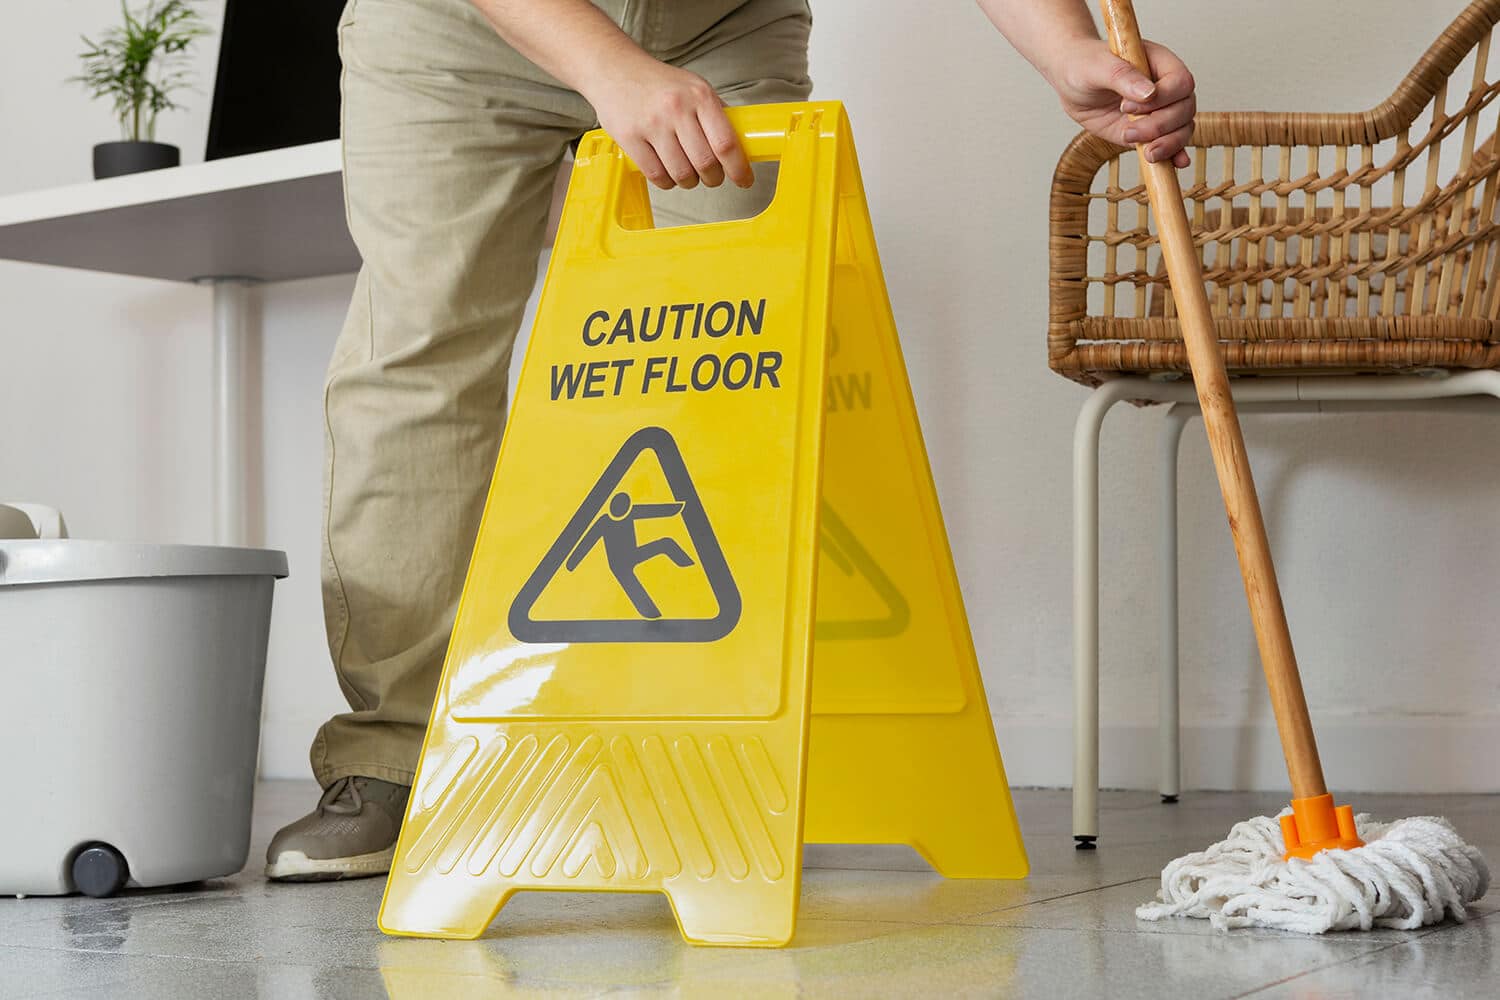 The Most Common Types of Slips and Falls That Can Lead to Lawsuits